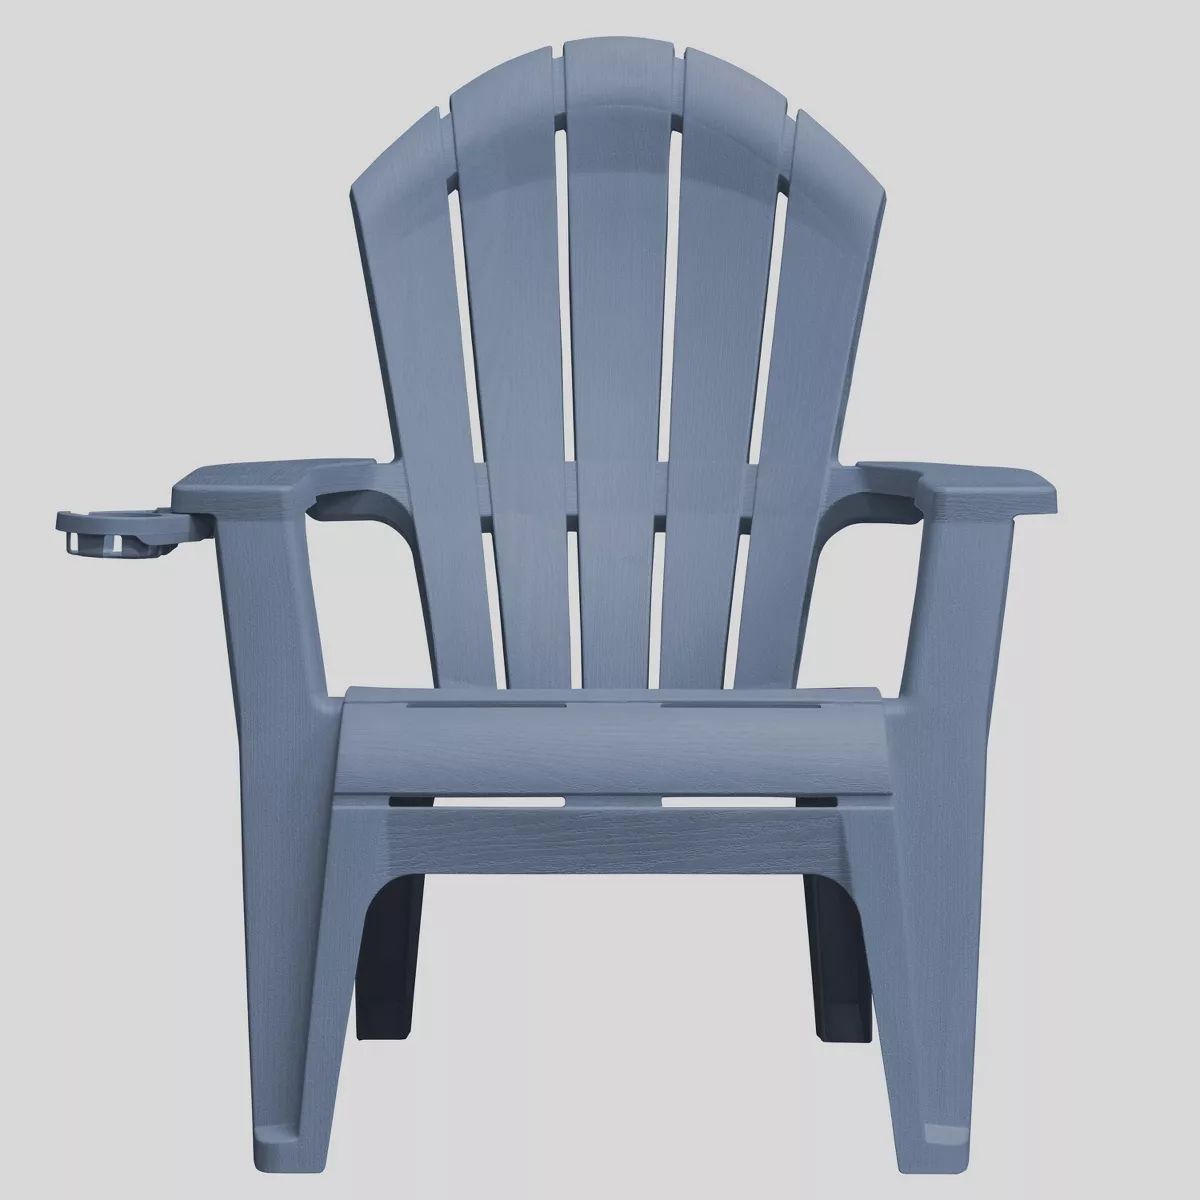 Adams Manufacturing Deluxe RealComfort Outdoor Patio Chairs, Adirondack Chairs | Target